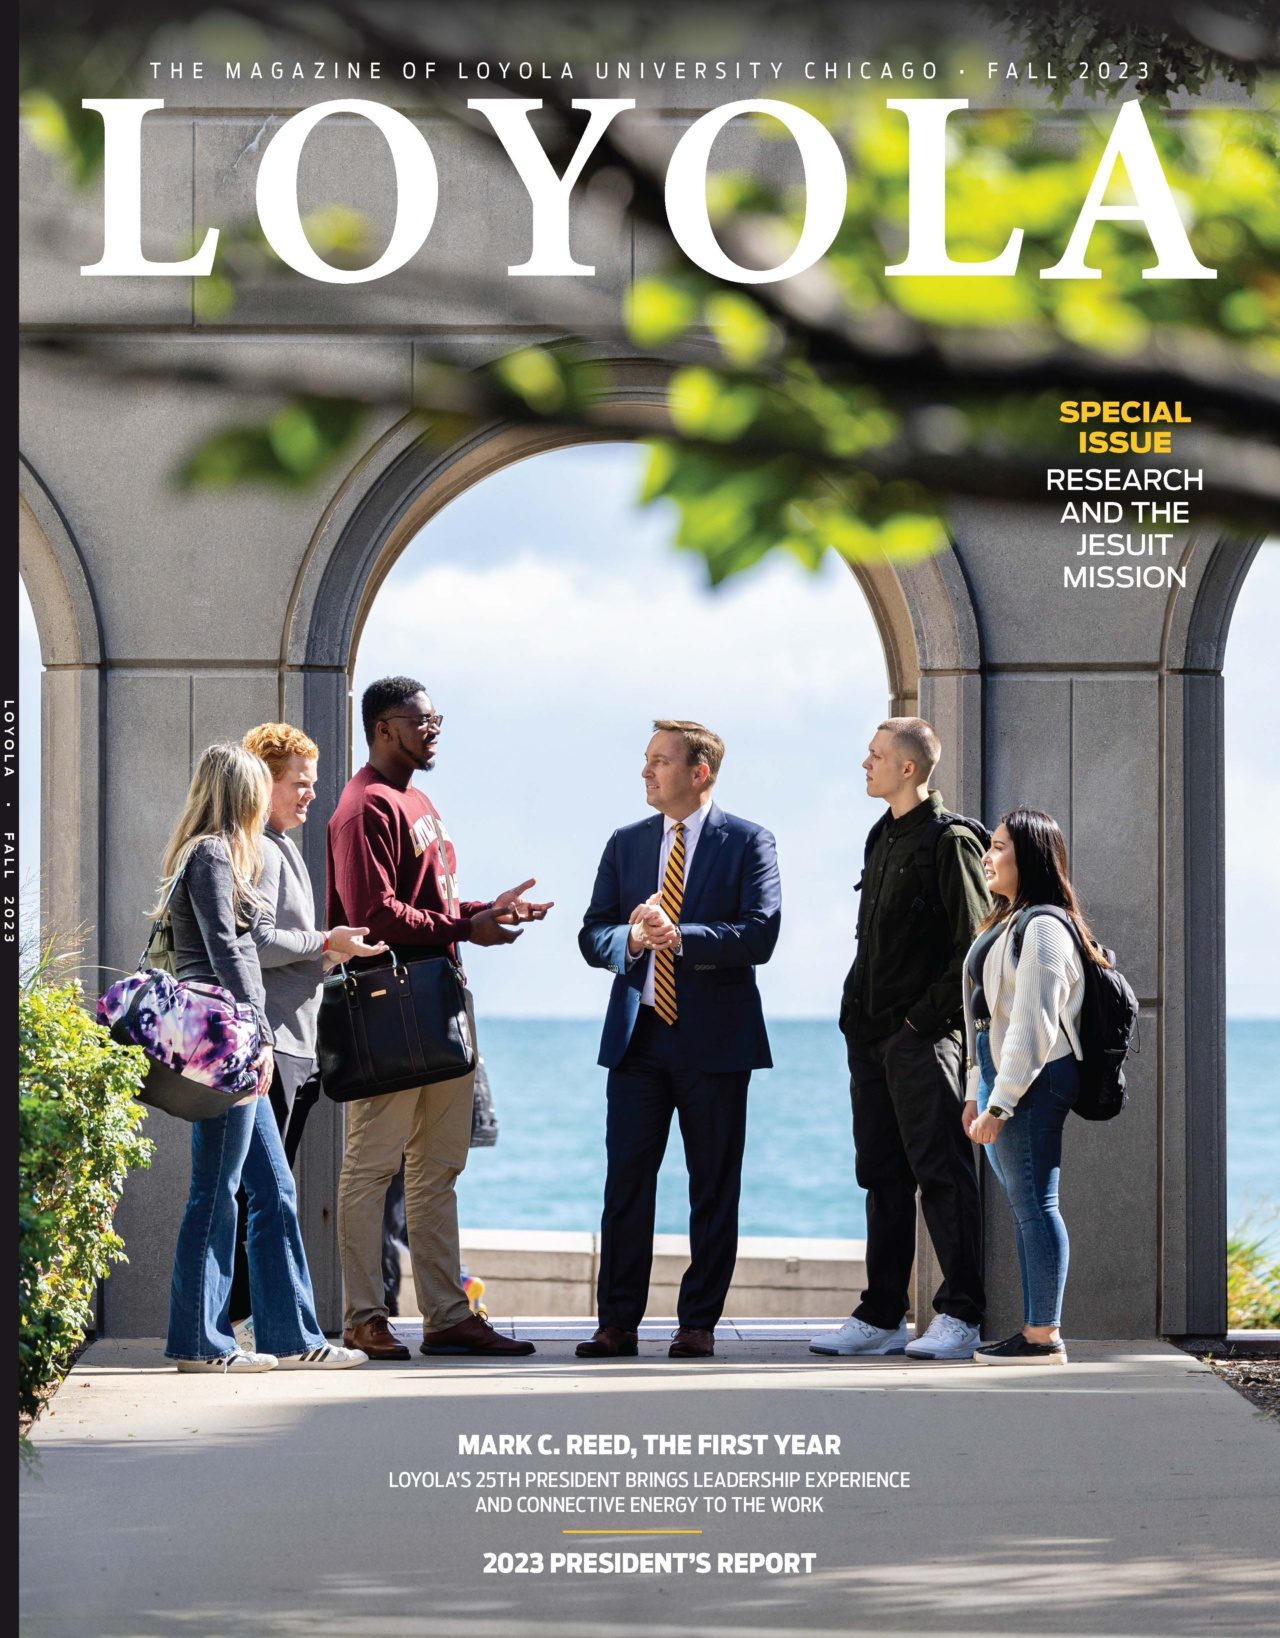 The fall 2023 issue of Loyola magazine with a group of people standing in front of an arch with a lake in the background and the text 